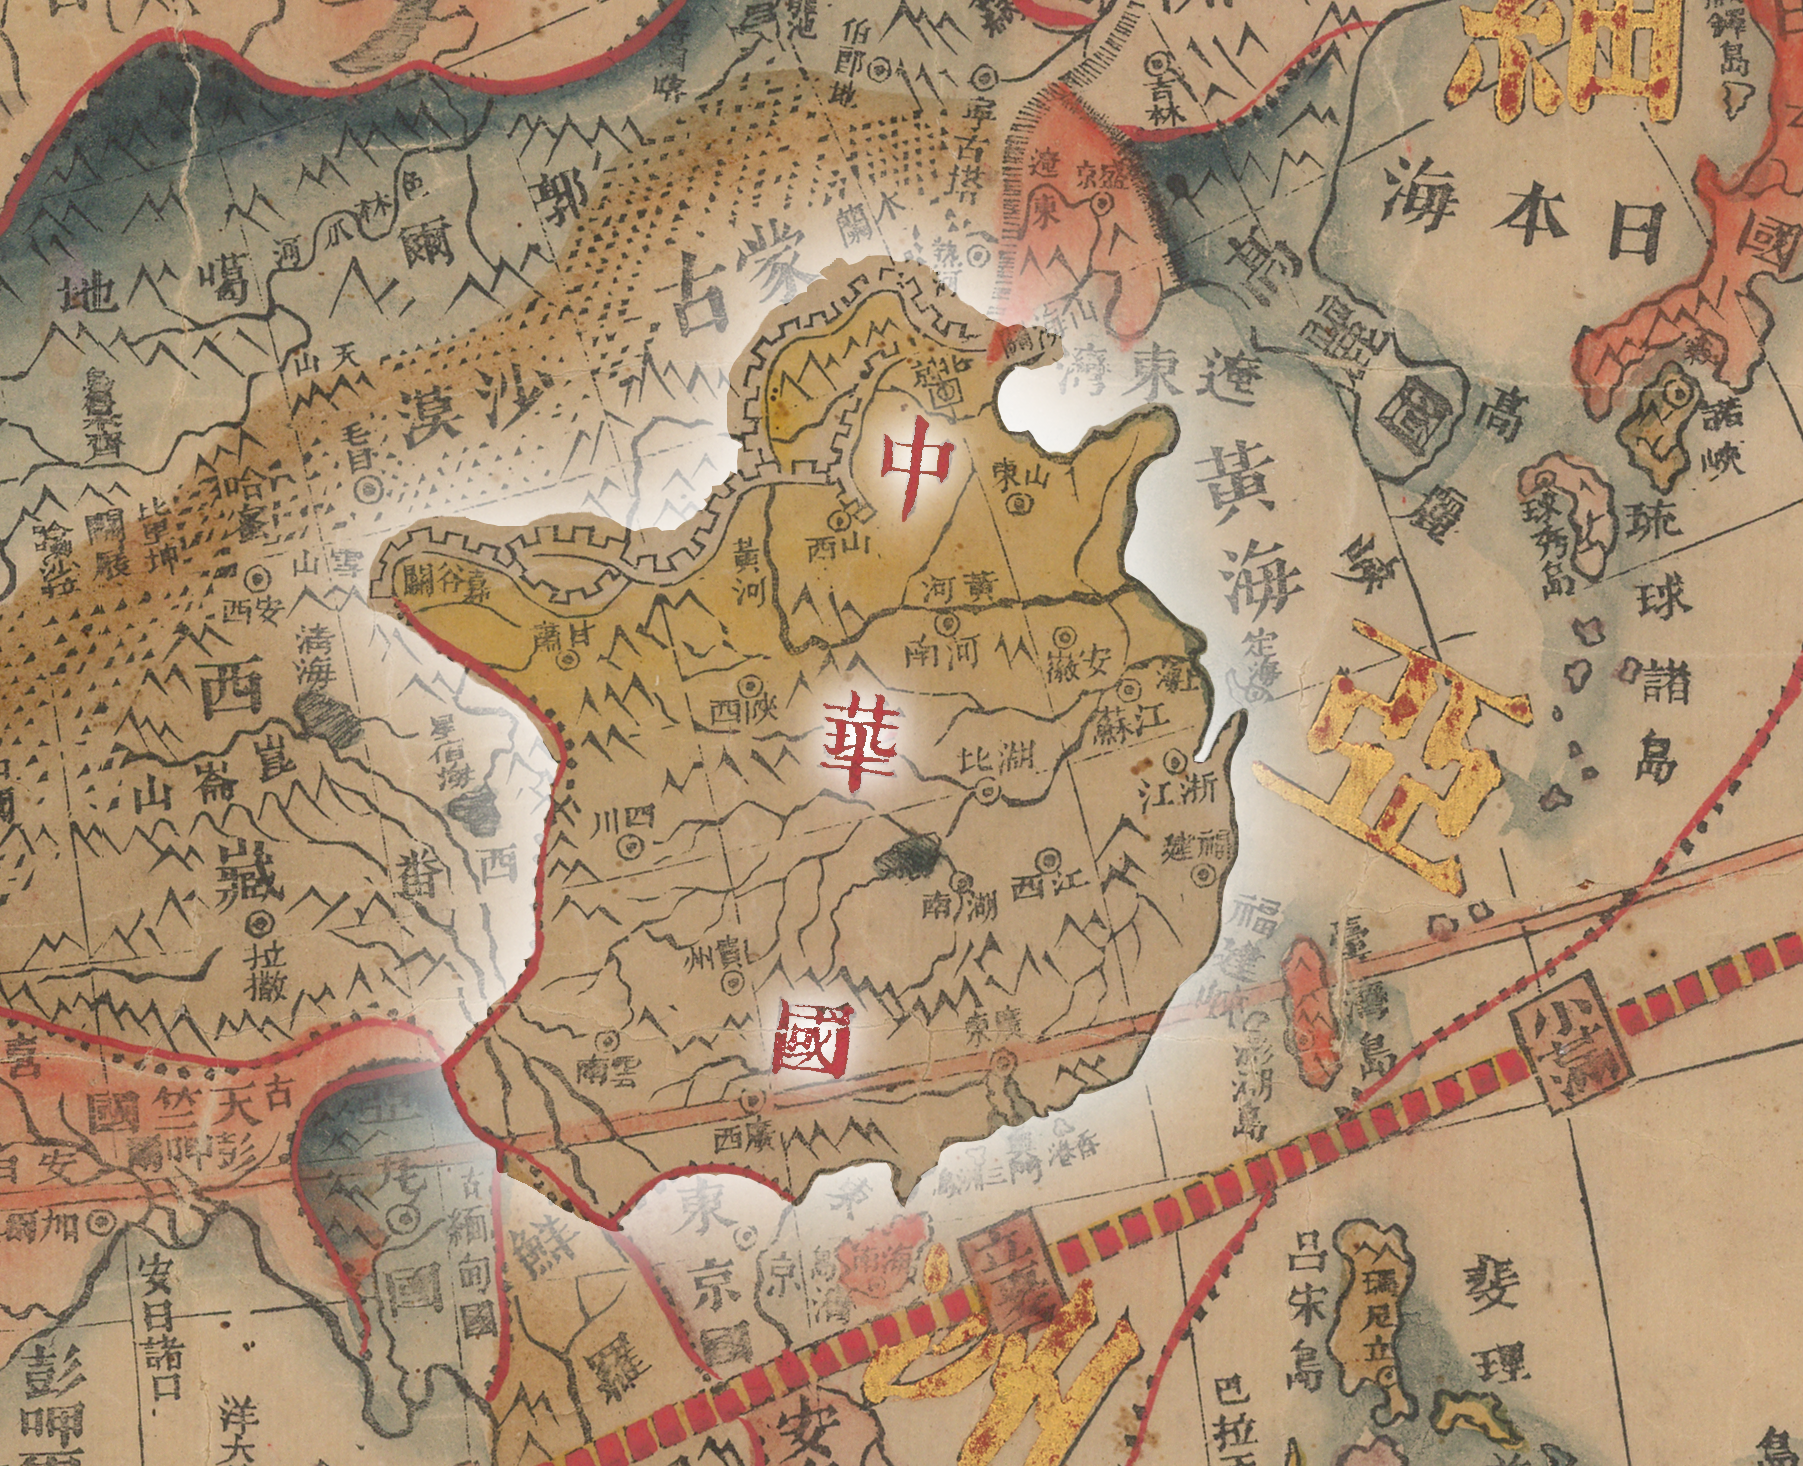 Detail of Qing China named on map